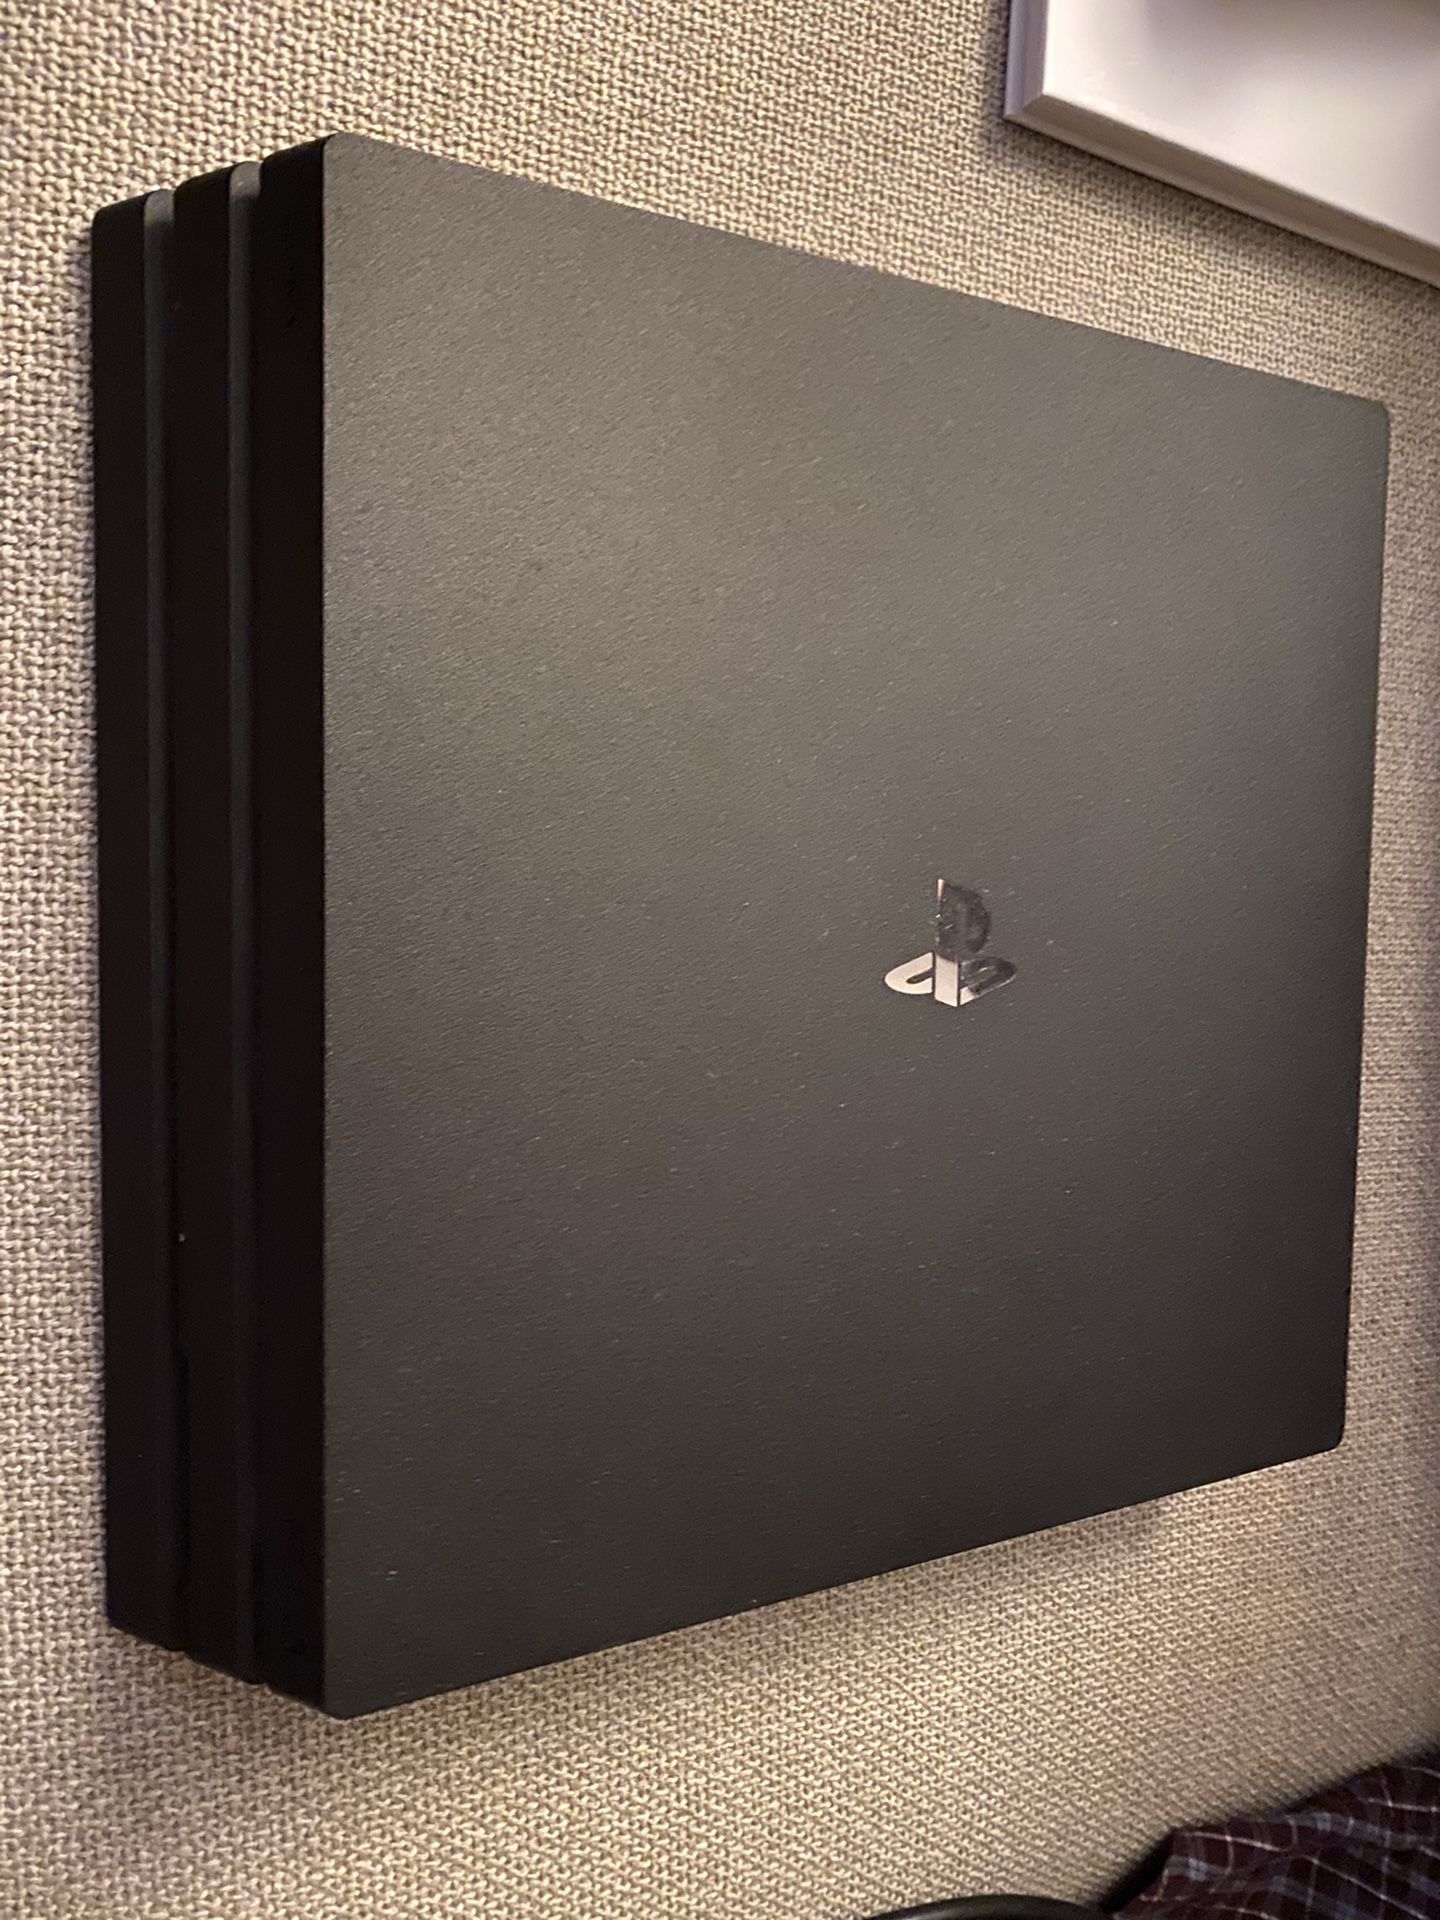 PS4 Pro Package